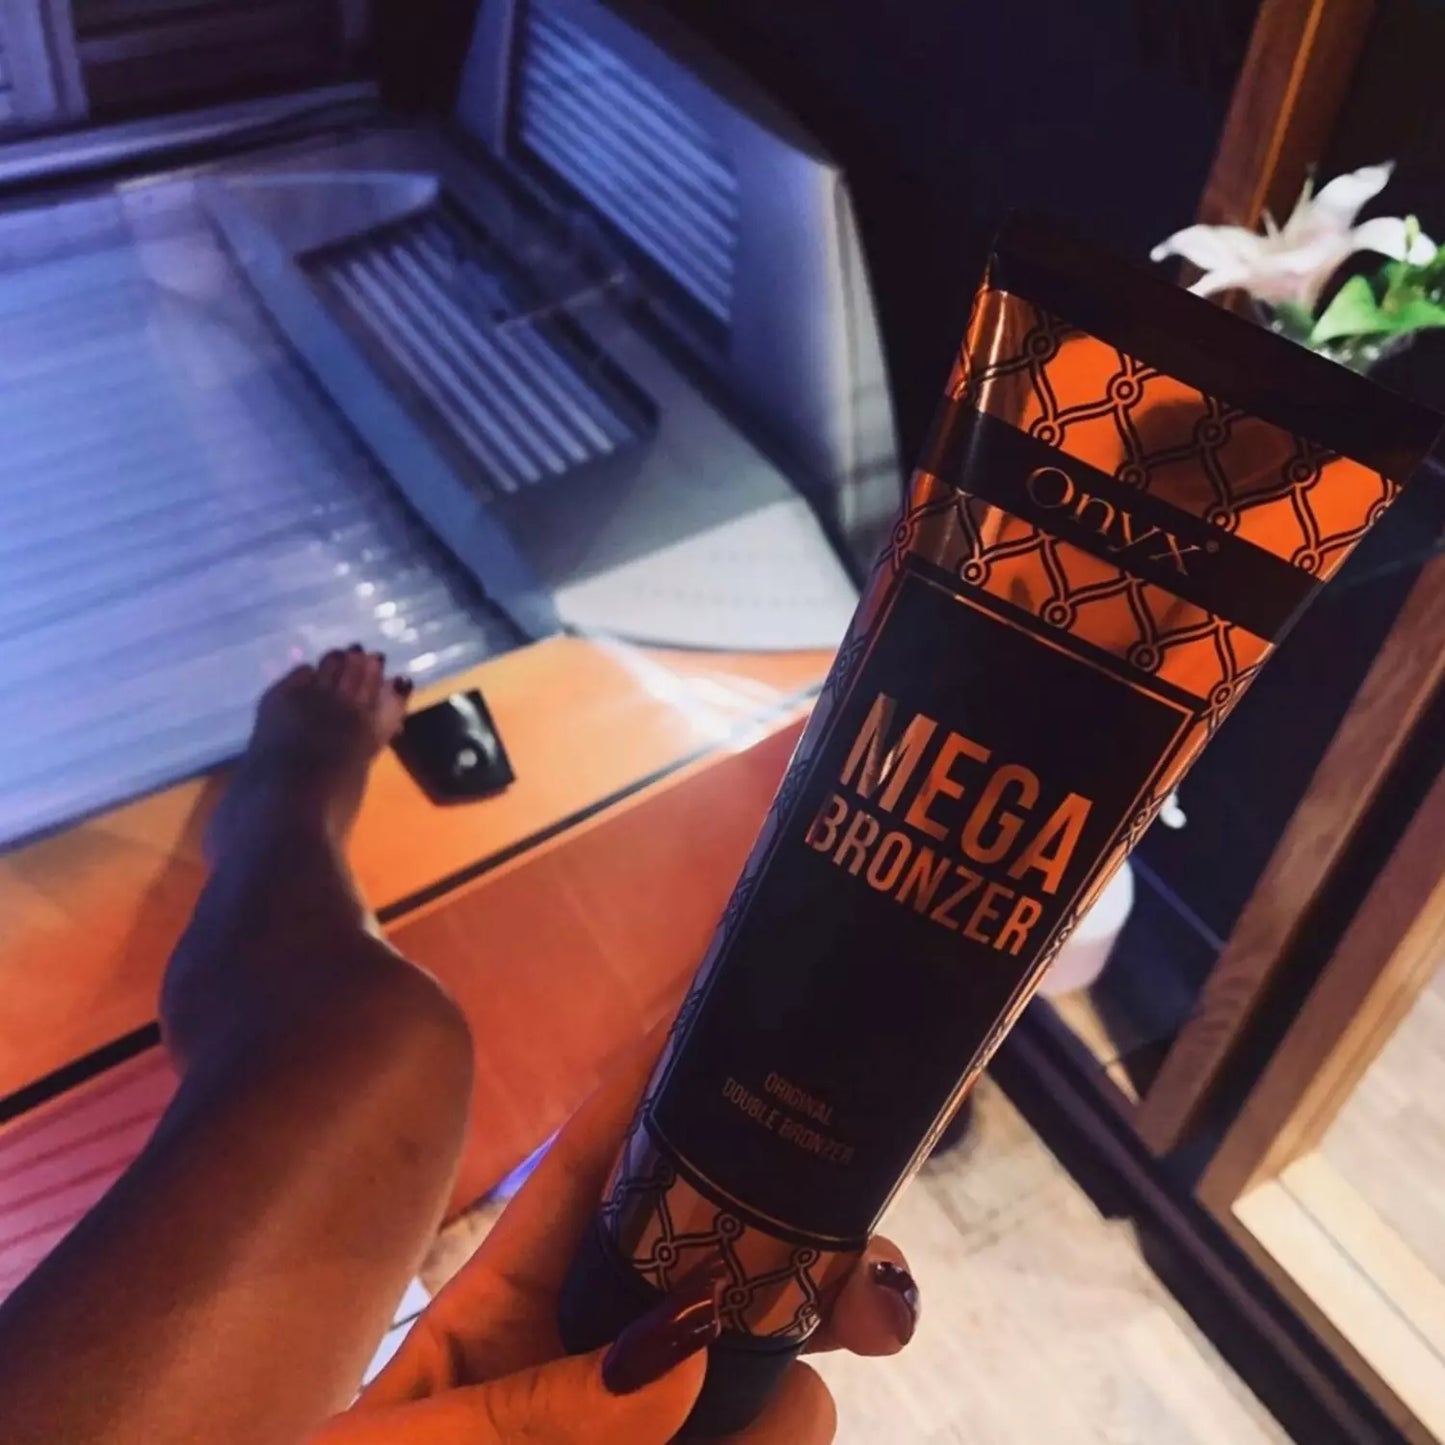 sunbed cream for indoor tanning beds tanned legs